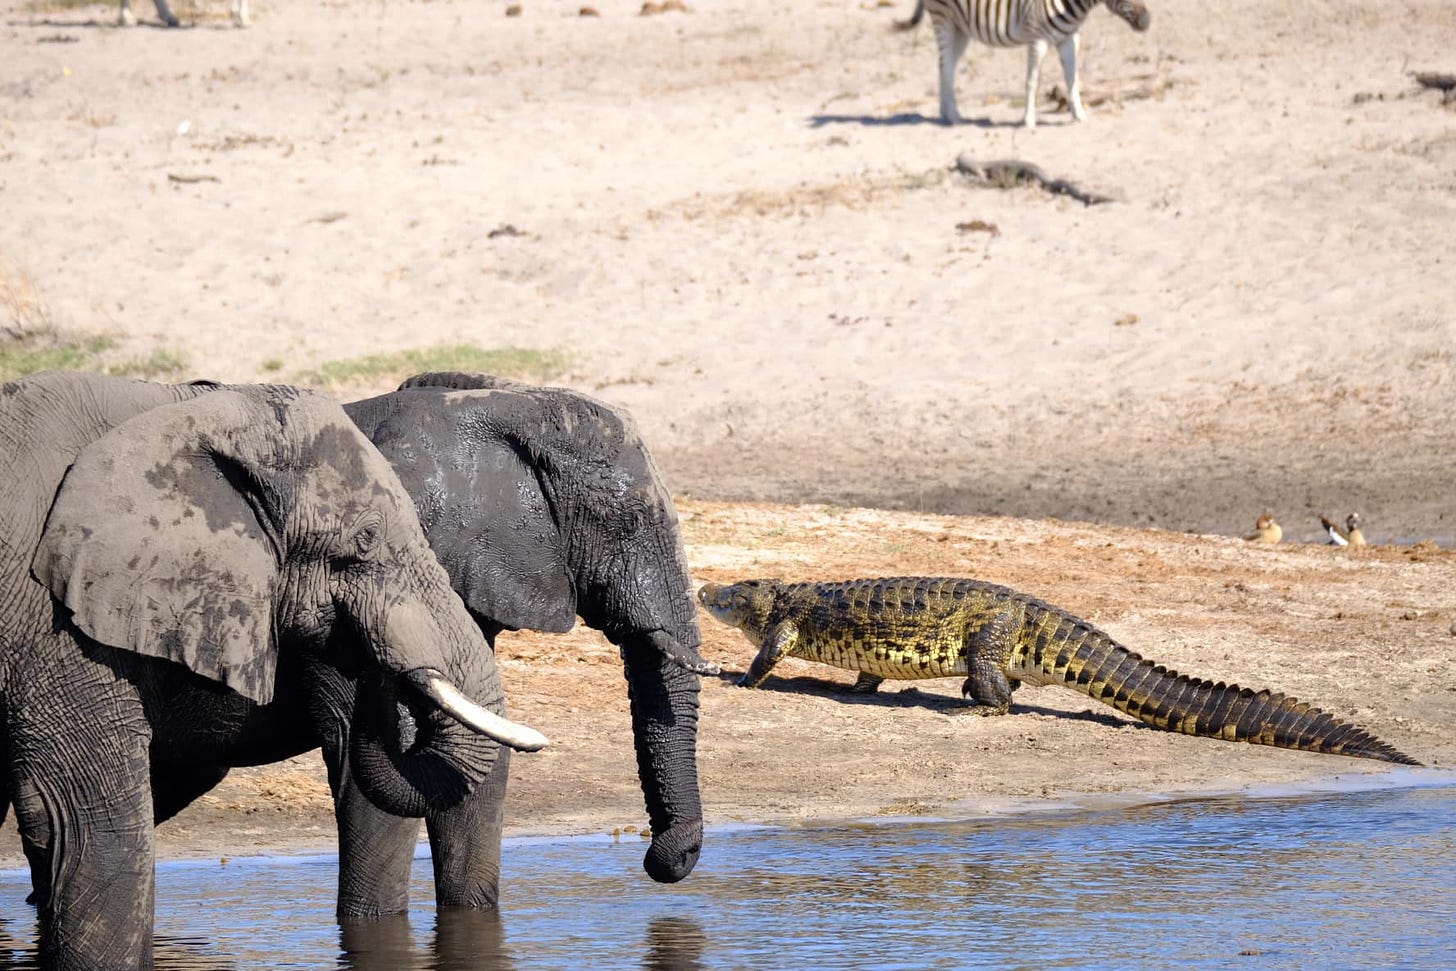 May be an image of elephant and crocodile